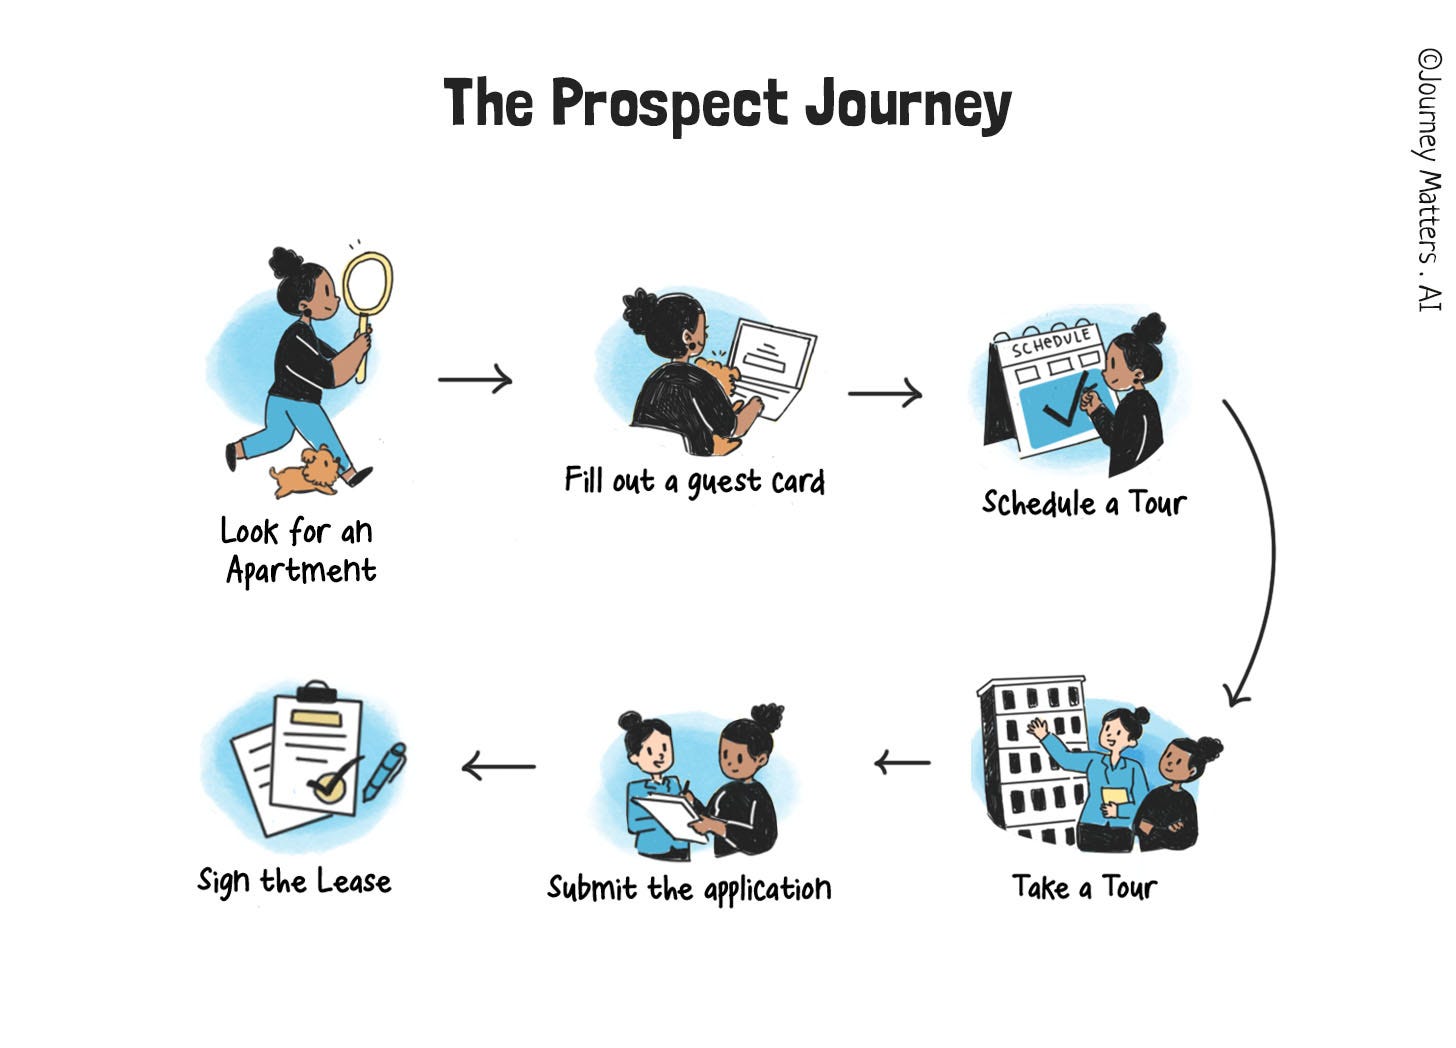 	Six steps in the prospect journey. First is look for an apartment, second is fill out a guest card, third is schedule a tour, fourth is take a tour, fifth is submit the application and sixth is sign the lease.